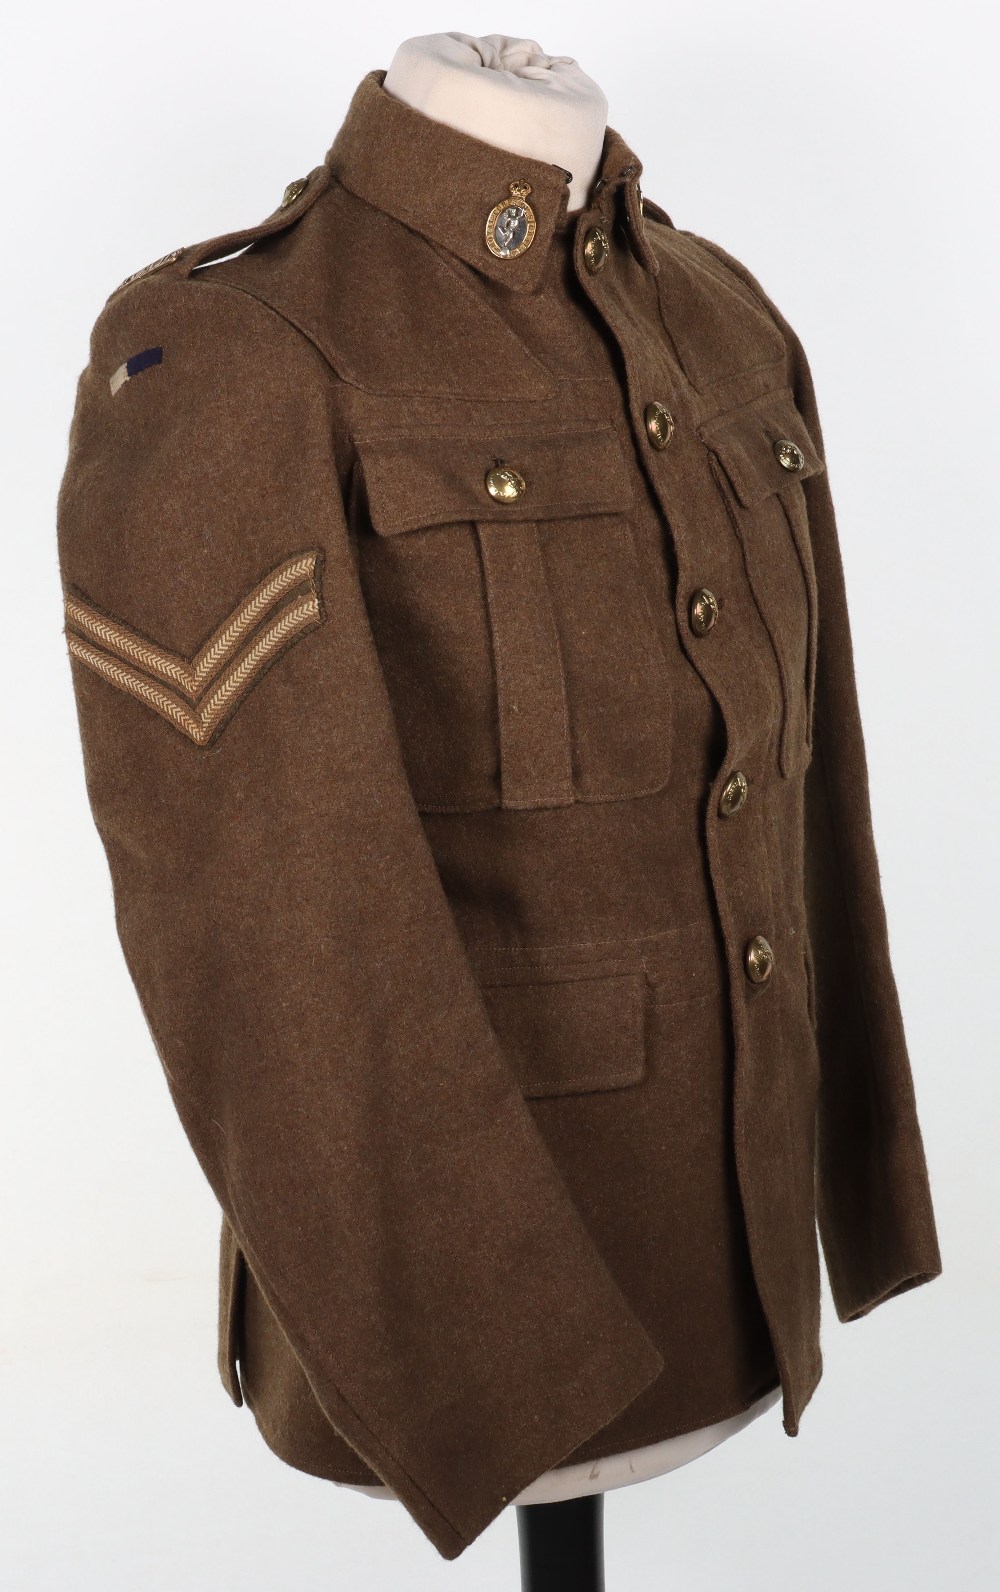 1922 Pattern Royal Signals Dispatch Riders Tunic and Peaked Cap - Image 4 of 19